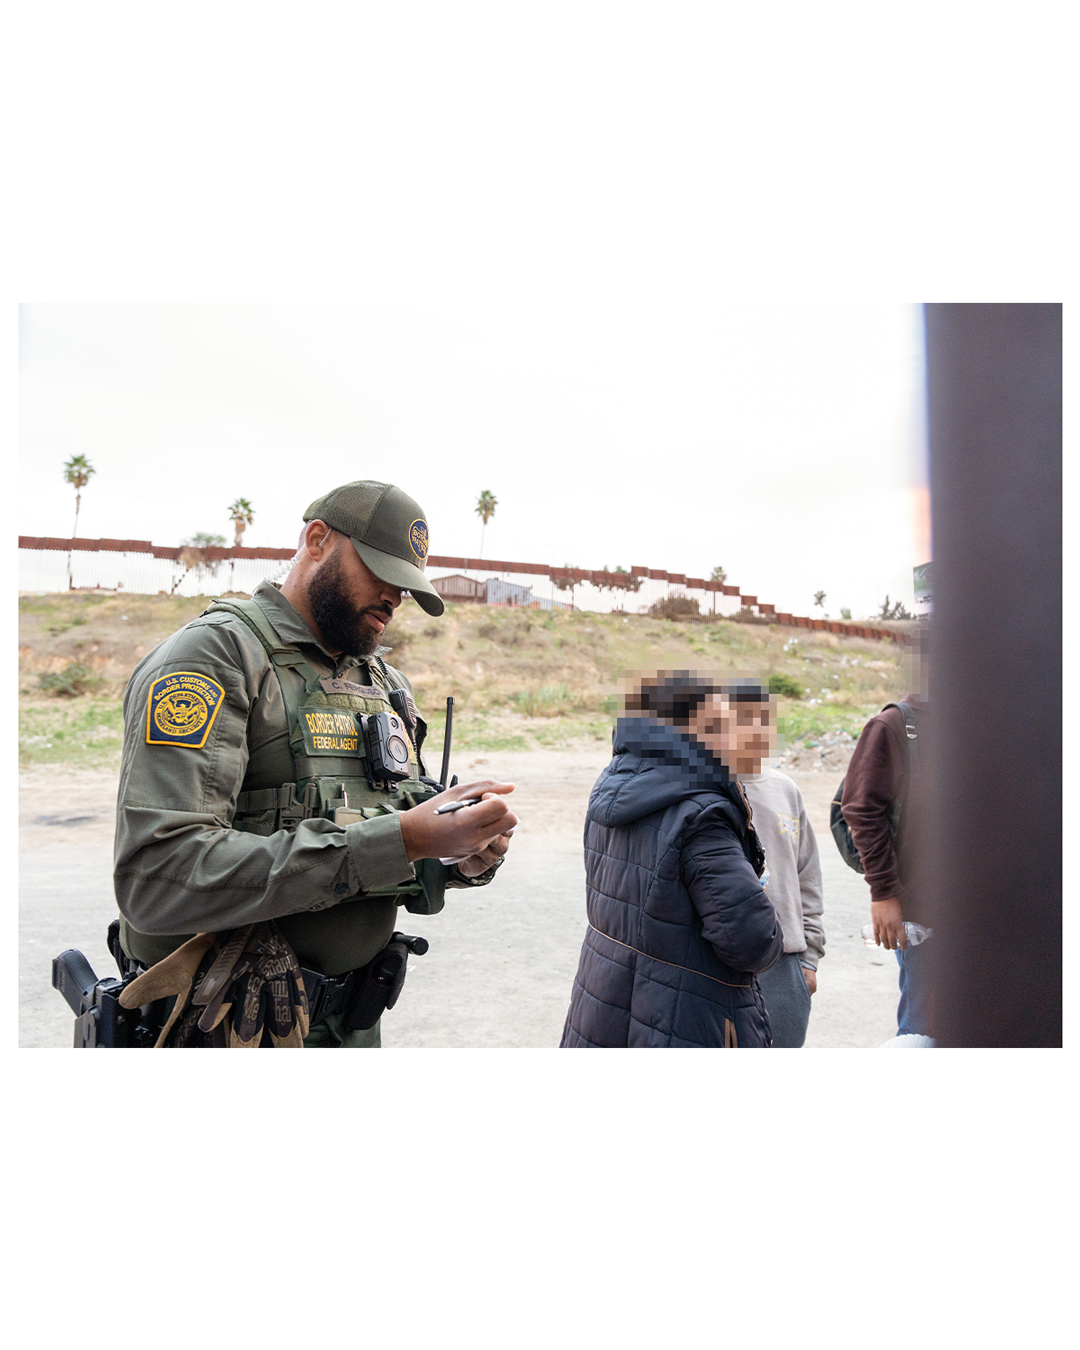 An armed Border Patrol agent holds a pen in his hand as he makes a note. A few migrants stand in front of him. Palm trees and a billboard can be seen in the distant background.